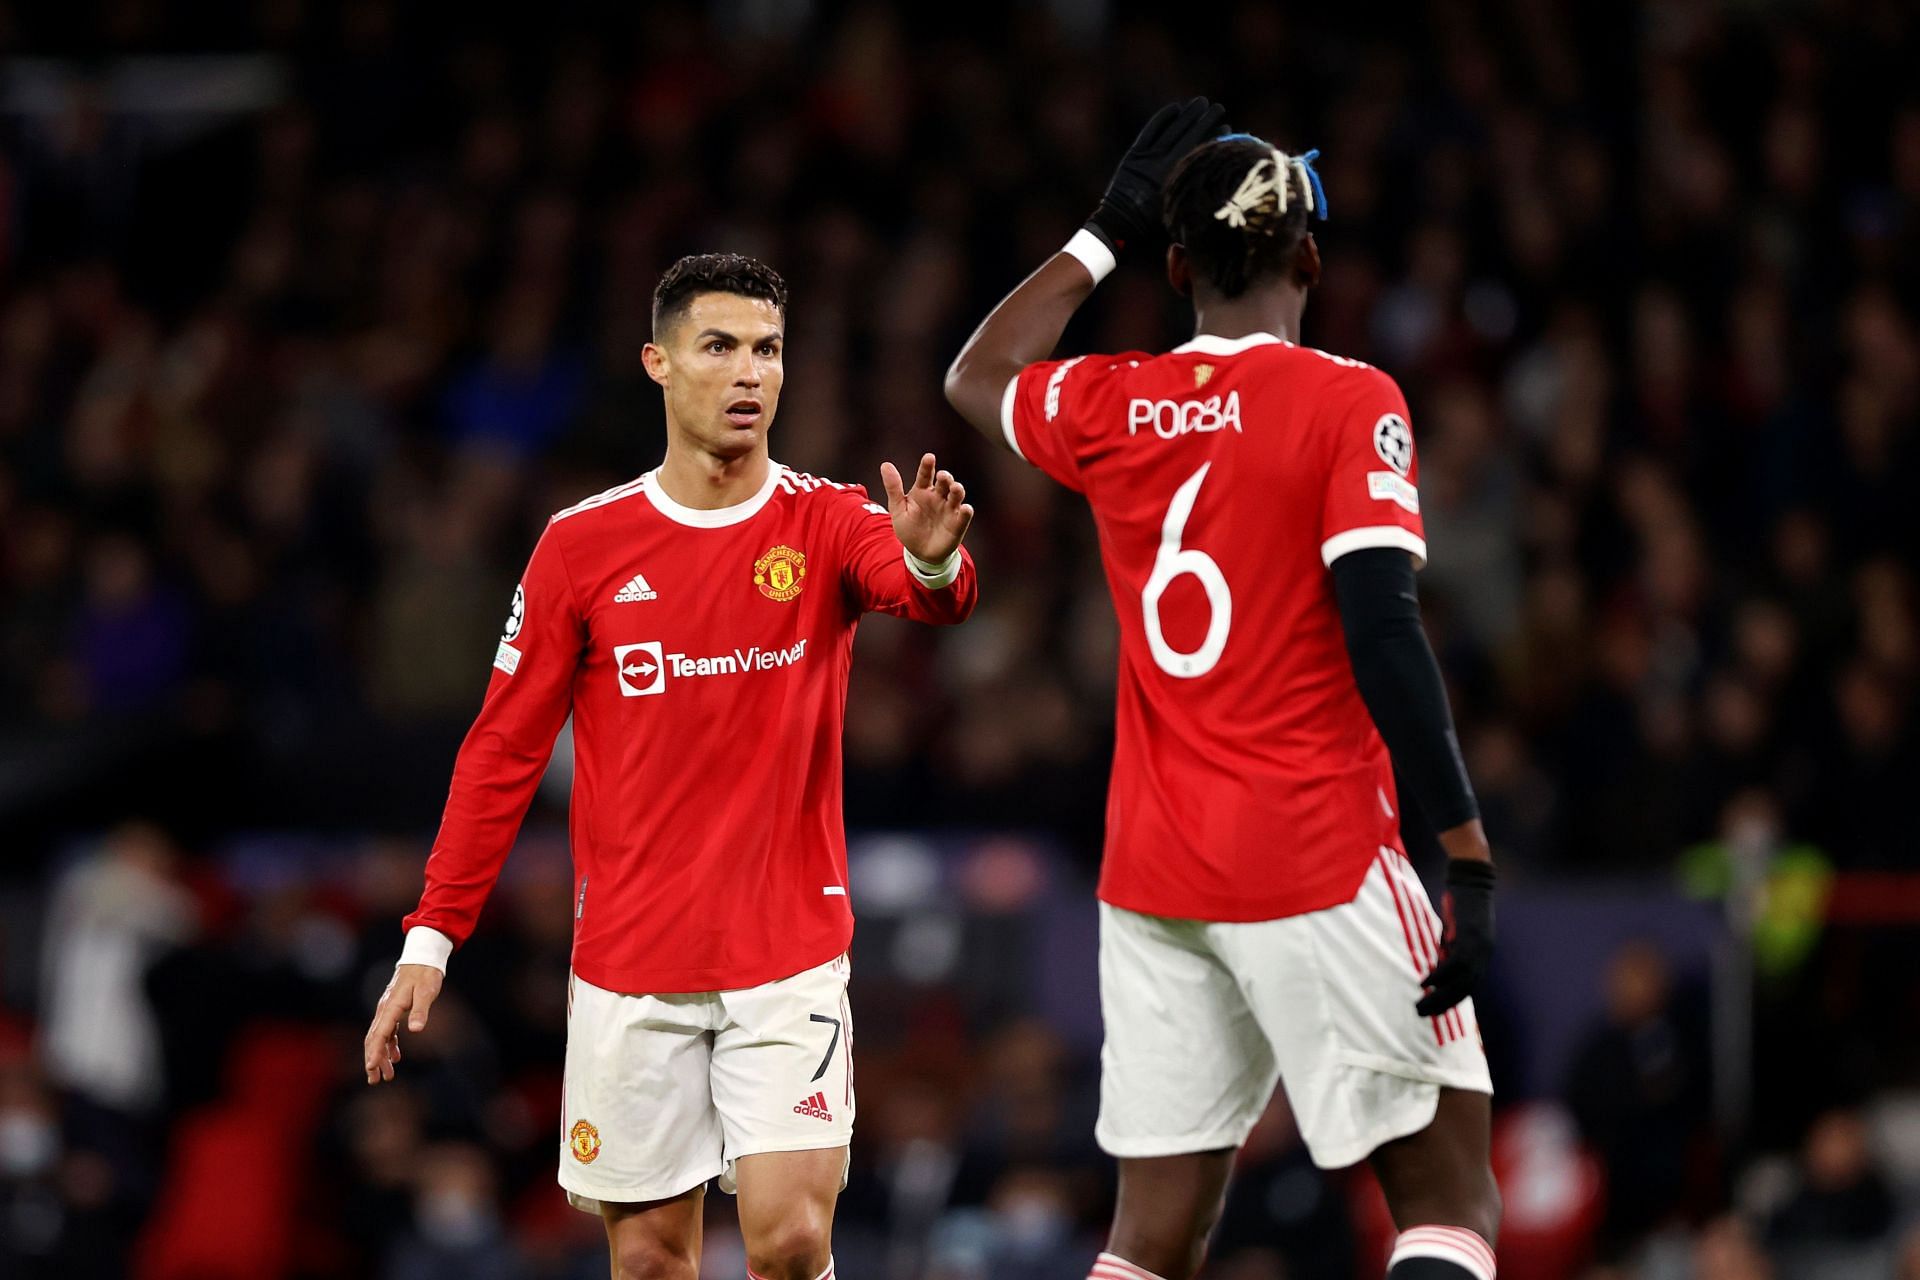 Cristiano Ronaldo and Pogba are just two of plethora of stars at Manchester United